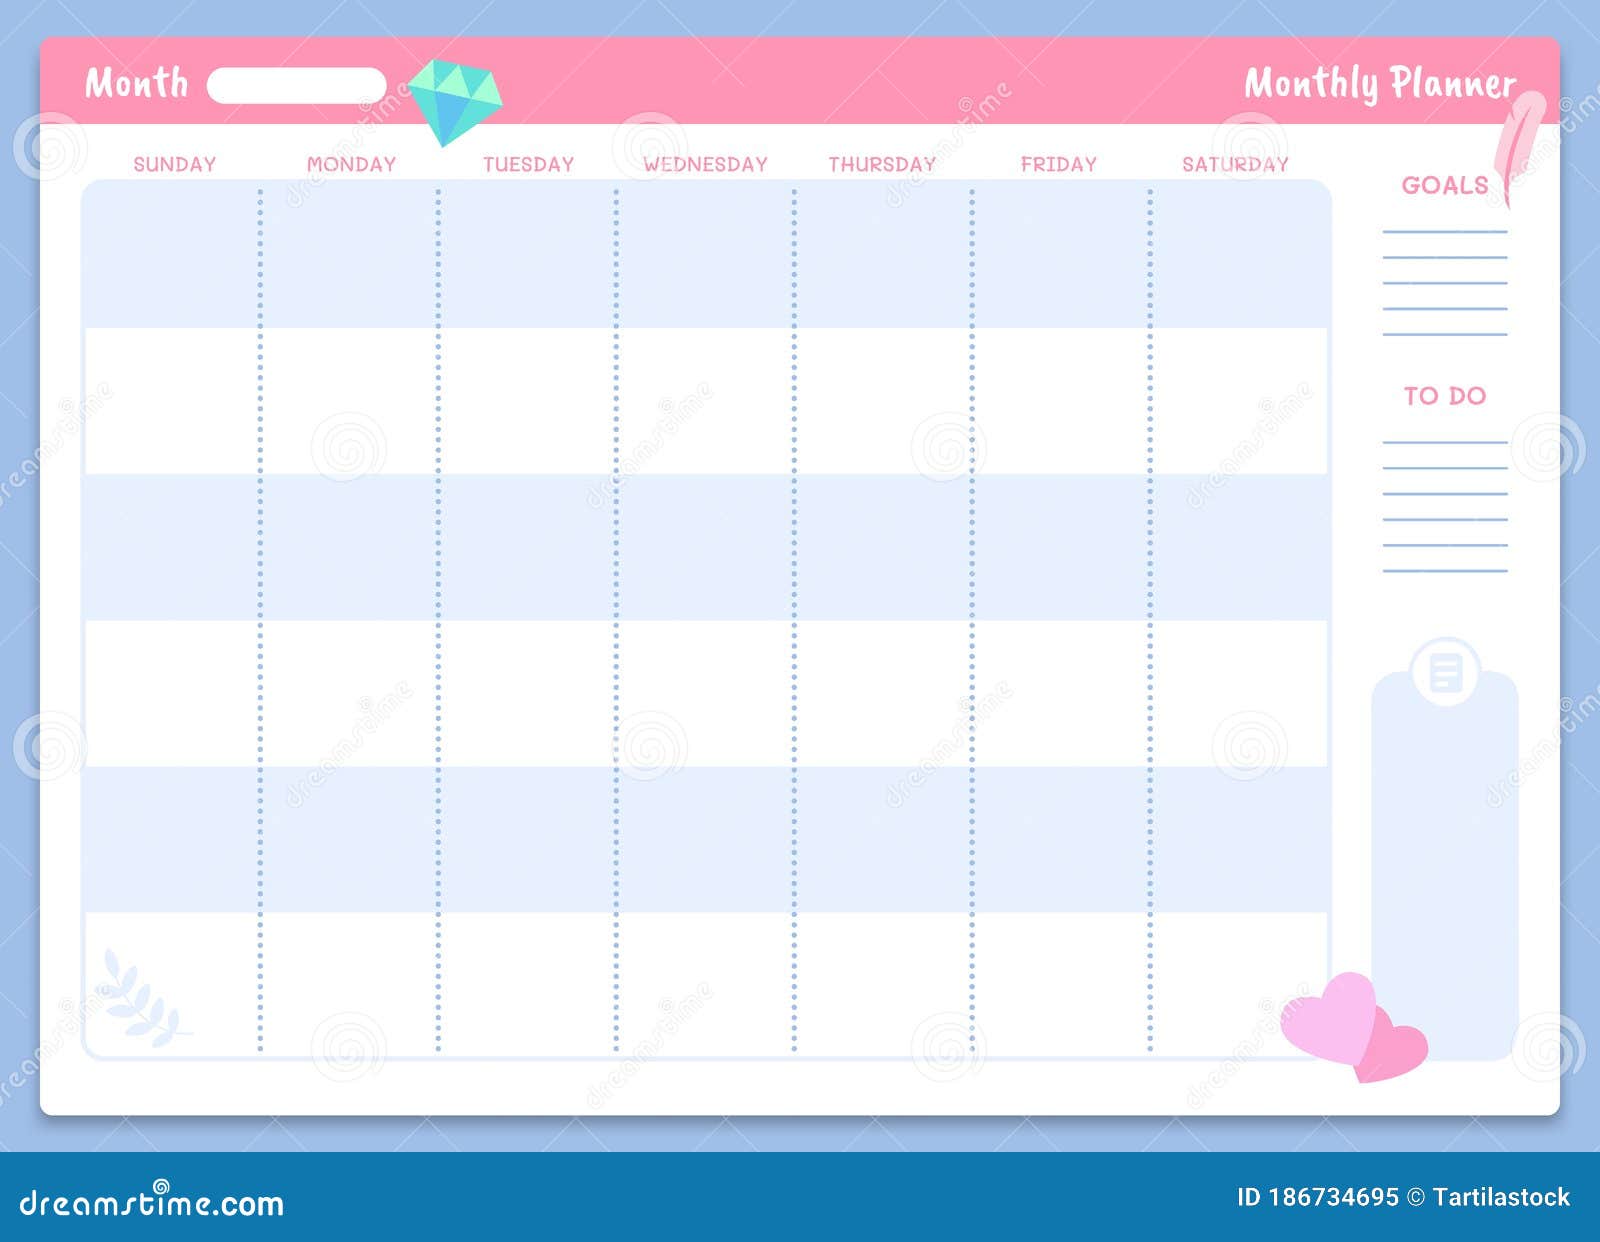 Monthly Planner Template - Printable